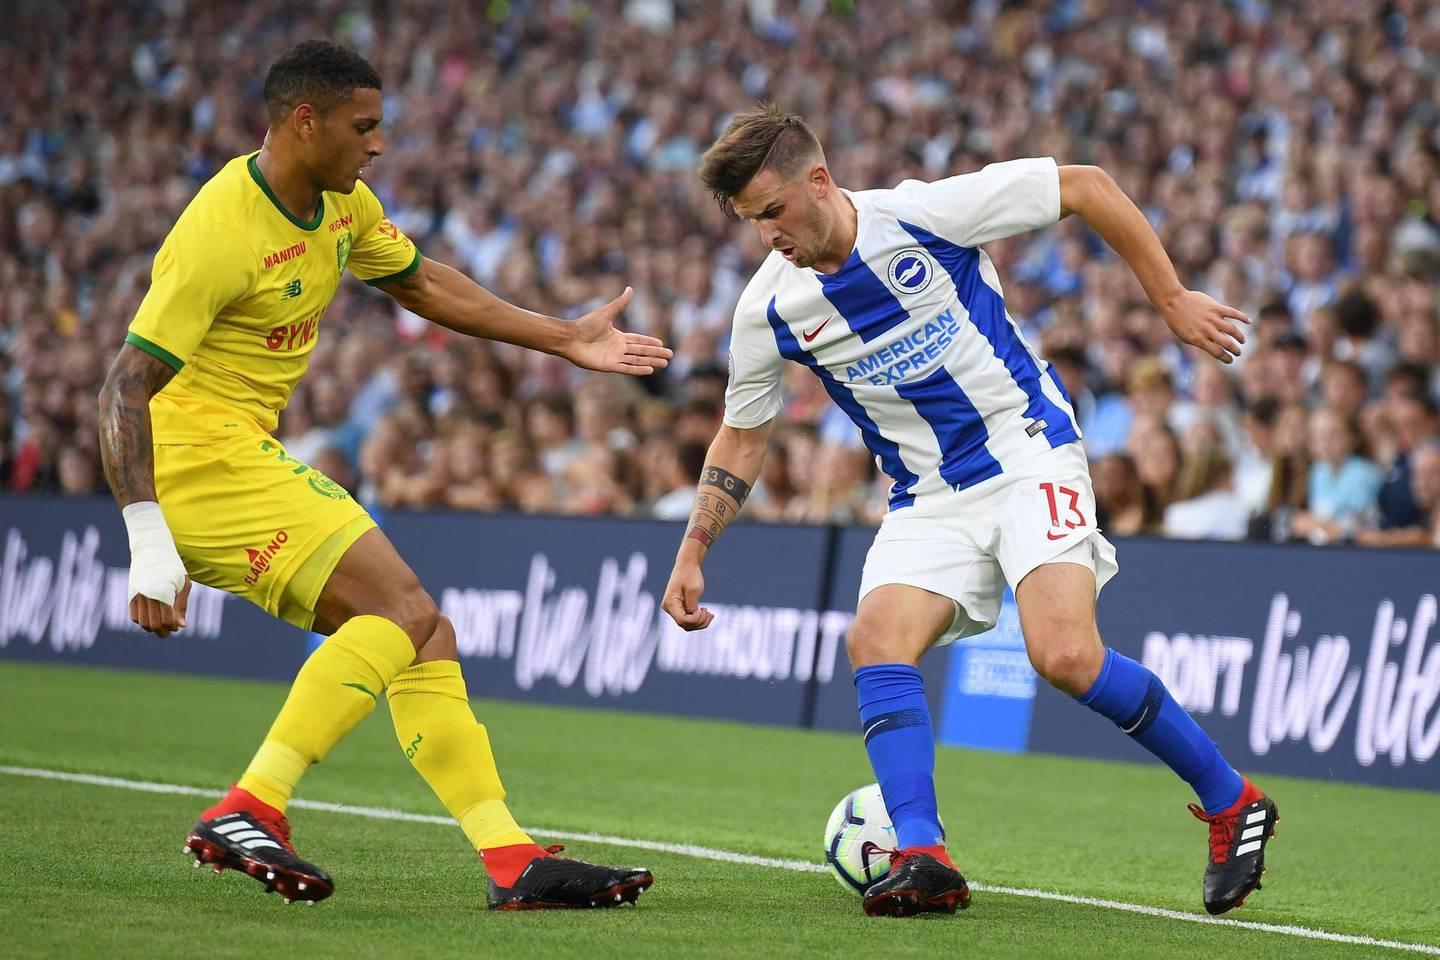 BRIGHTON, ENGLAND - AUGUST 03:  Pascal Gross of Brighton is challenged by Diego Carlos of Nantes during a Pre-Season Friendly between Brighton and Hove Albion and FC Nantes at Amex Stadium on August 3, 2018 in Brighton, England.  (Photo by Mike Hewitt/Getty Images)